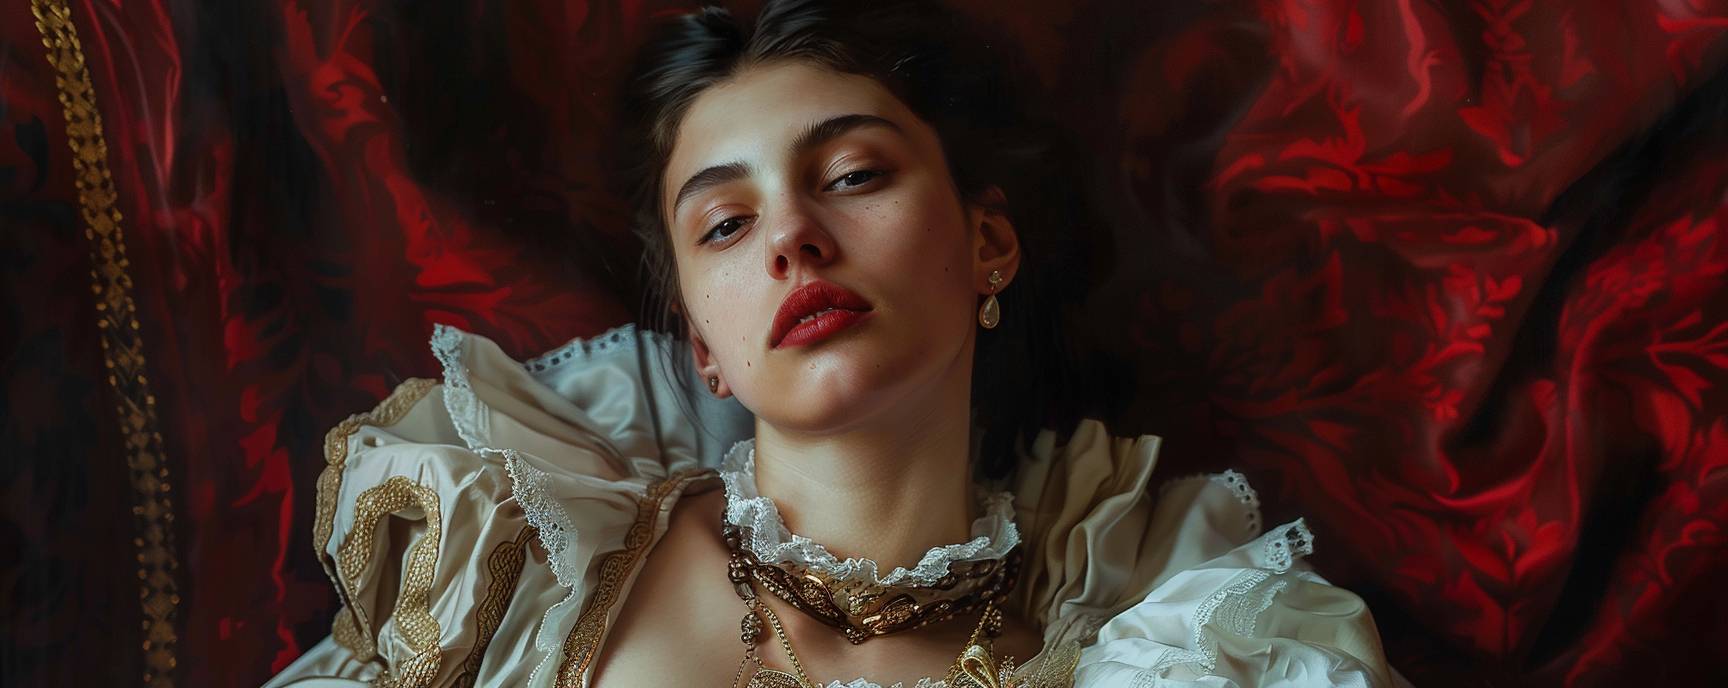 [Artist] painted in an elegant Renaissance outfit. [artist description]. The background of the painting contains dark hues in a classical oil portraiture style of renaissance art, cinematic lighting, hyper-realistic, elegance and grandeur typical for historical portraits --ar 5:2 --v 6.0